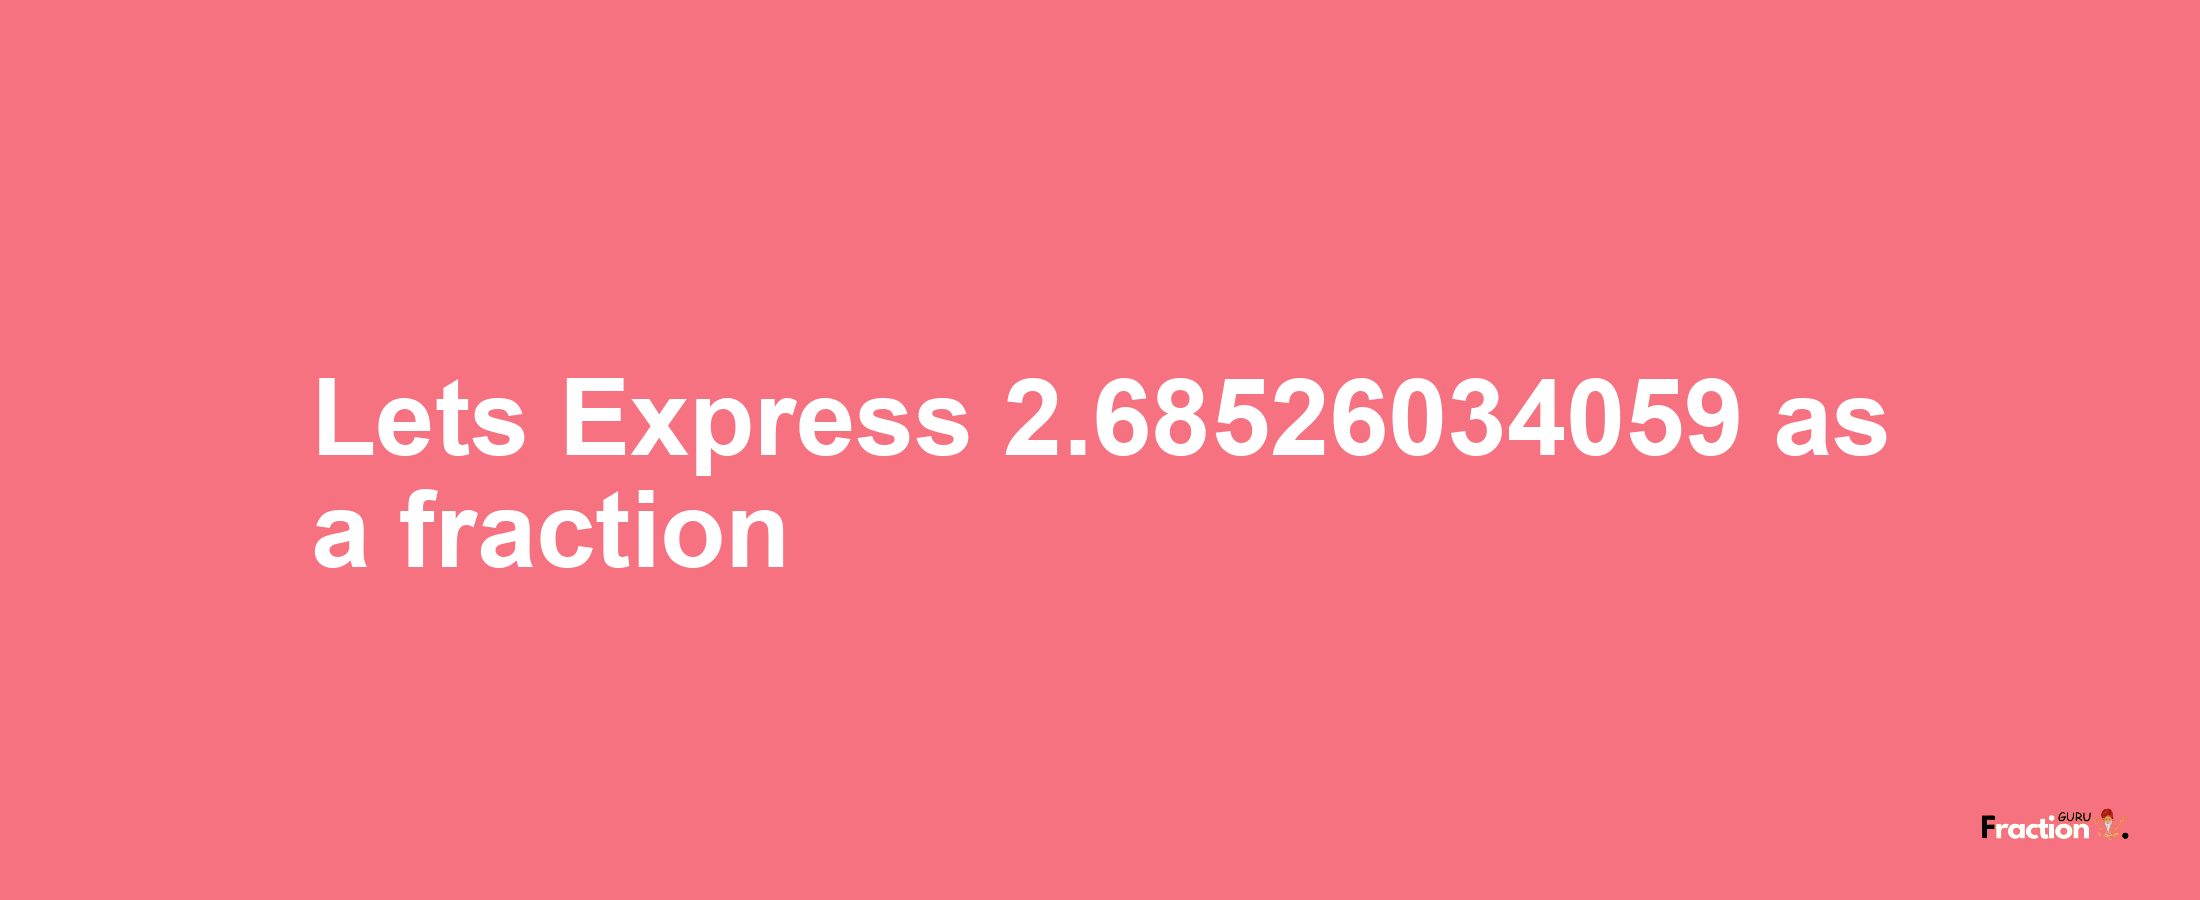 Lets Express 2.68526034059 as afraction